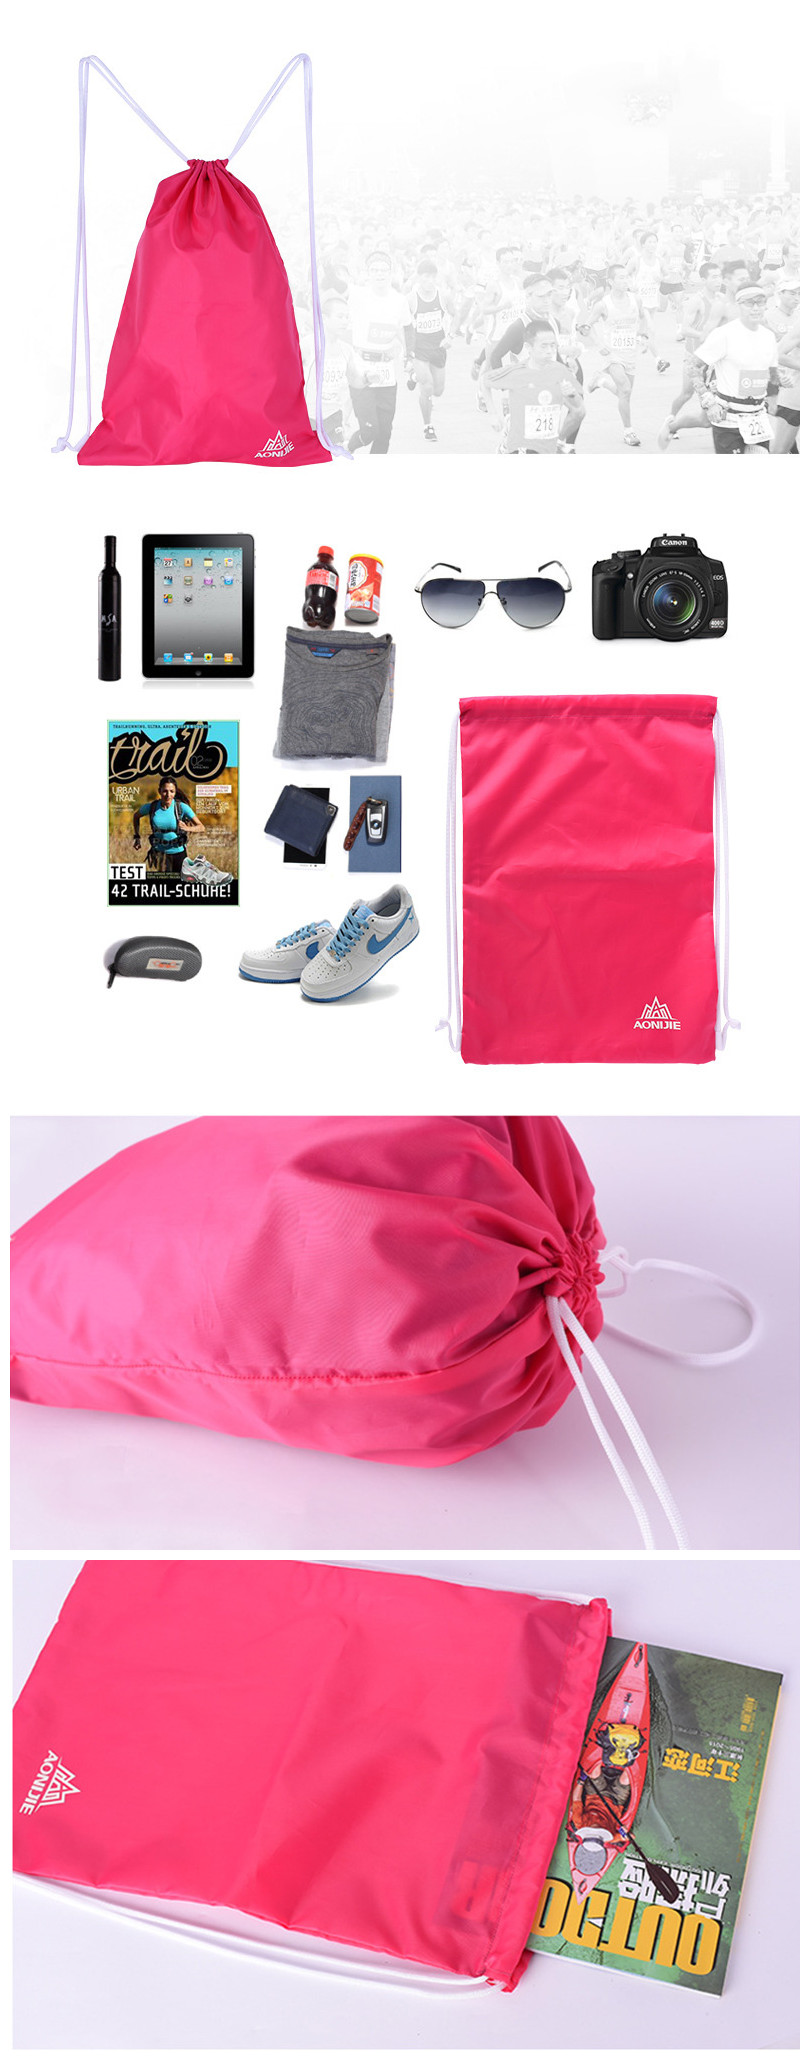 AONIJIE-Outdoor-Sports-Drawstring-Backpack-Unisex-Ultralight-Climbing-Bag-Pack-Folding-Pouch-1106060